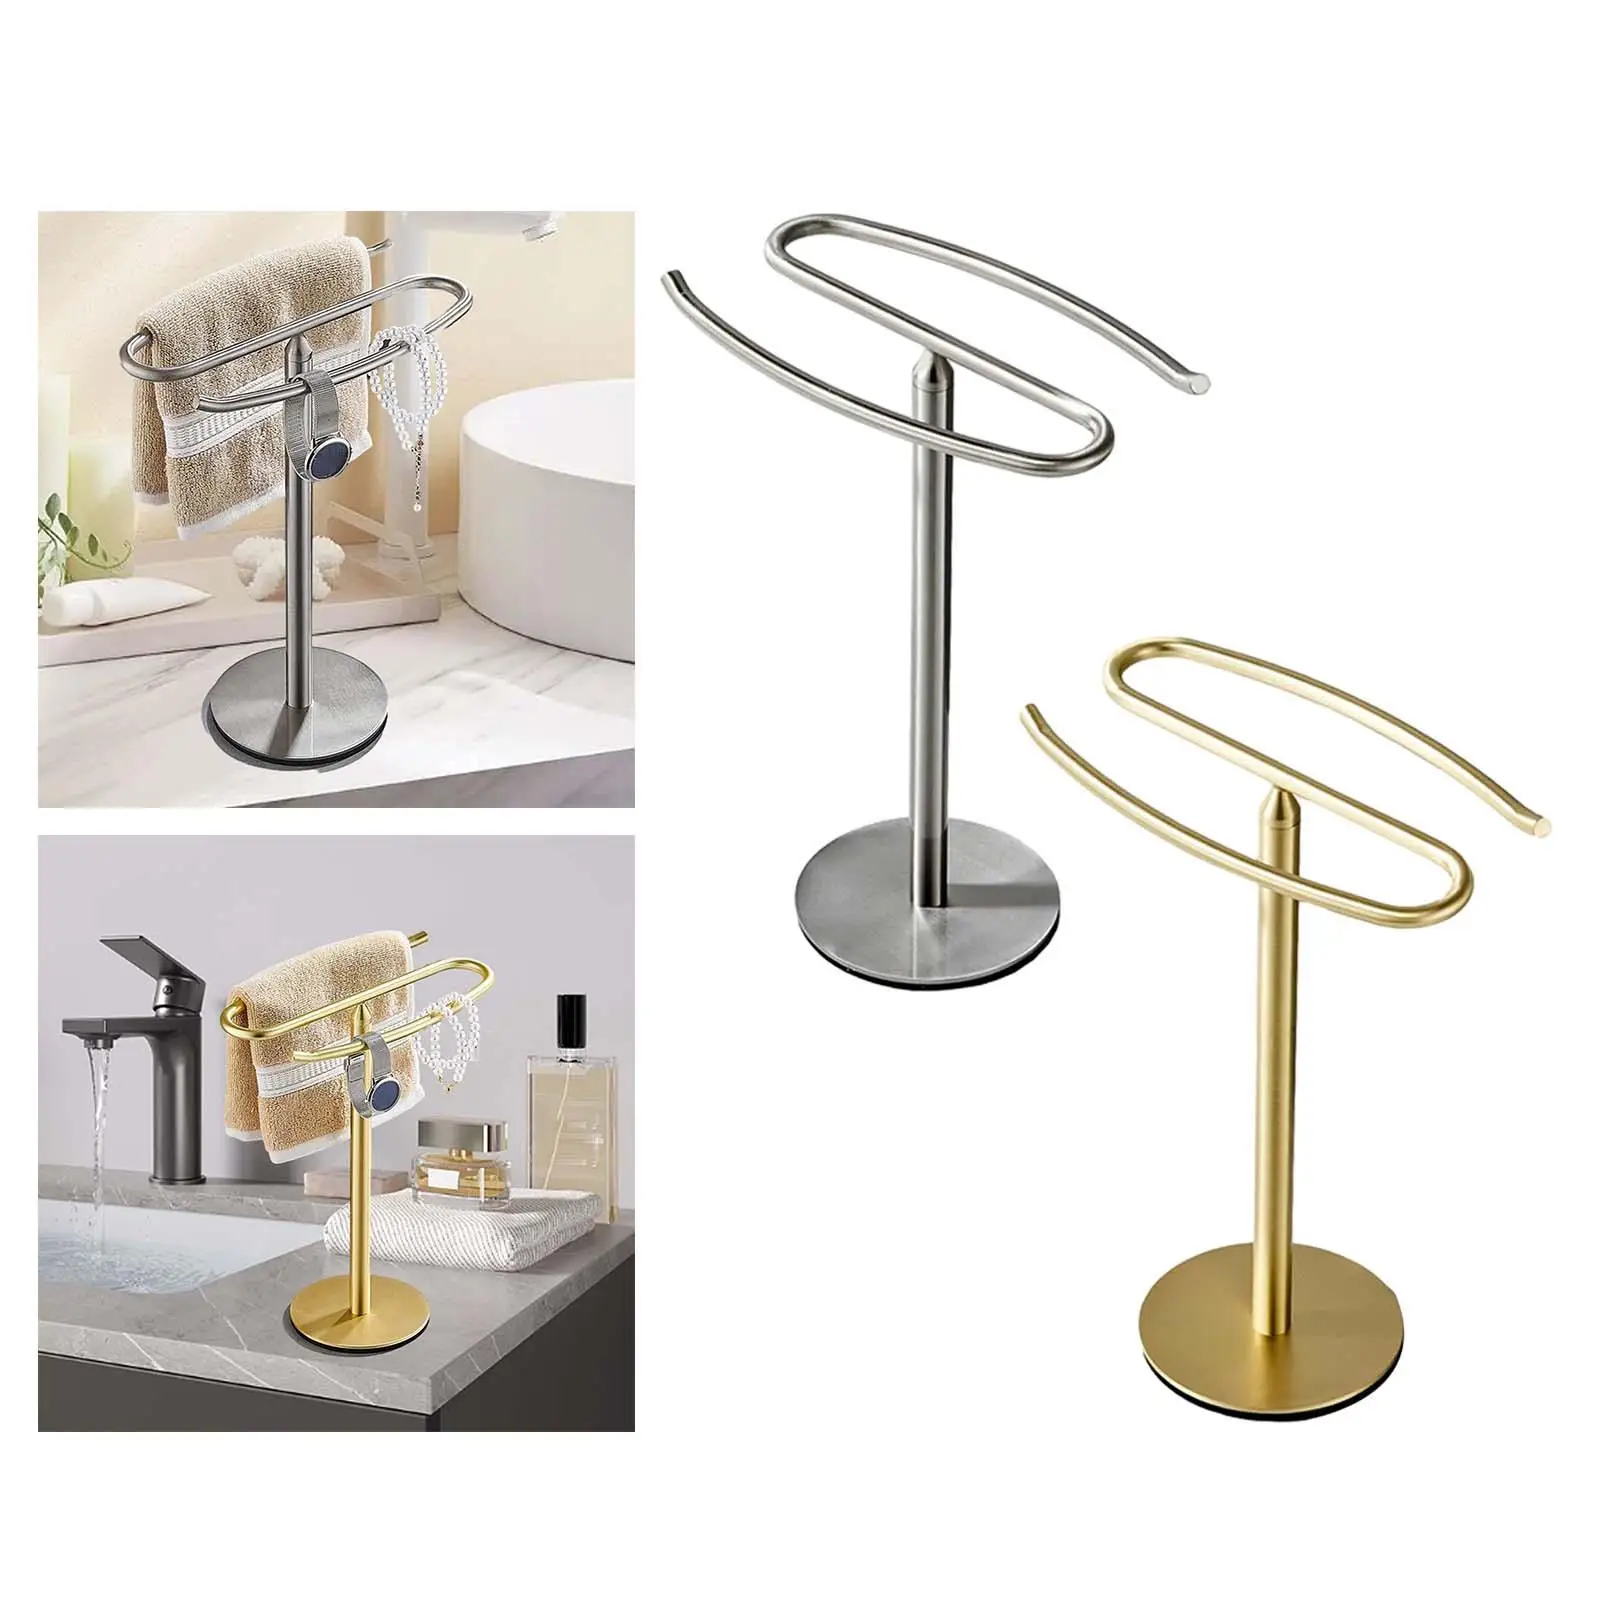 Hand Towel Stand Watch Holder Antiskid Bottom Versatile 12inch Tall Free Standing for Jewelry Bracelets Display Accessories